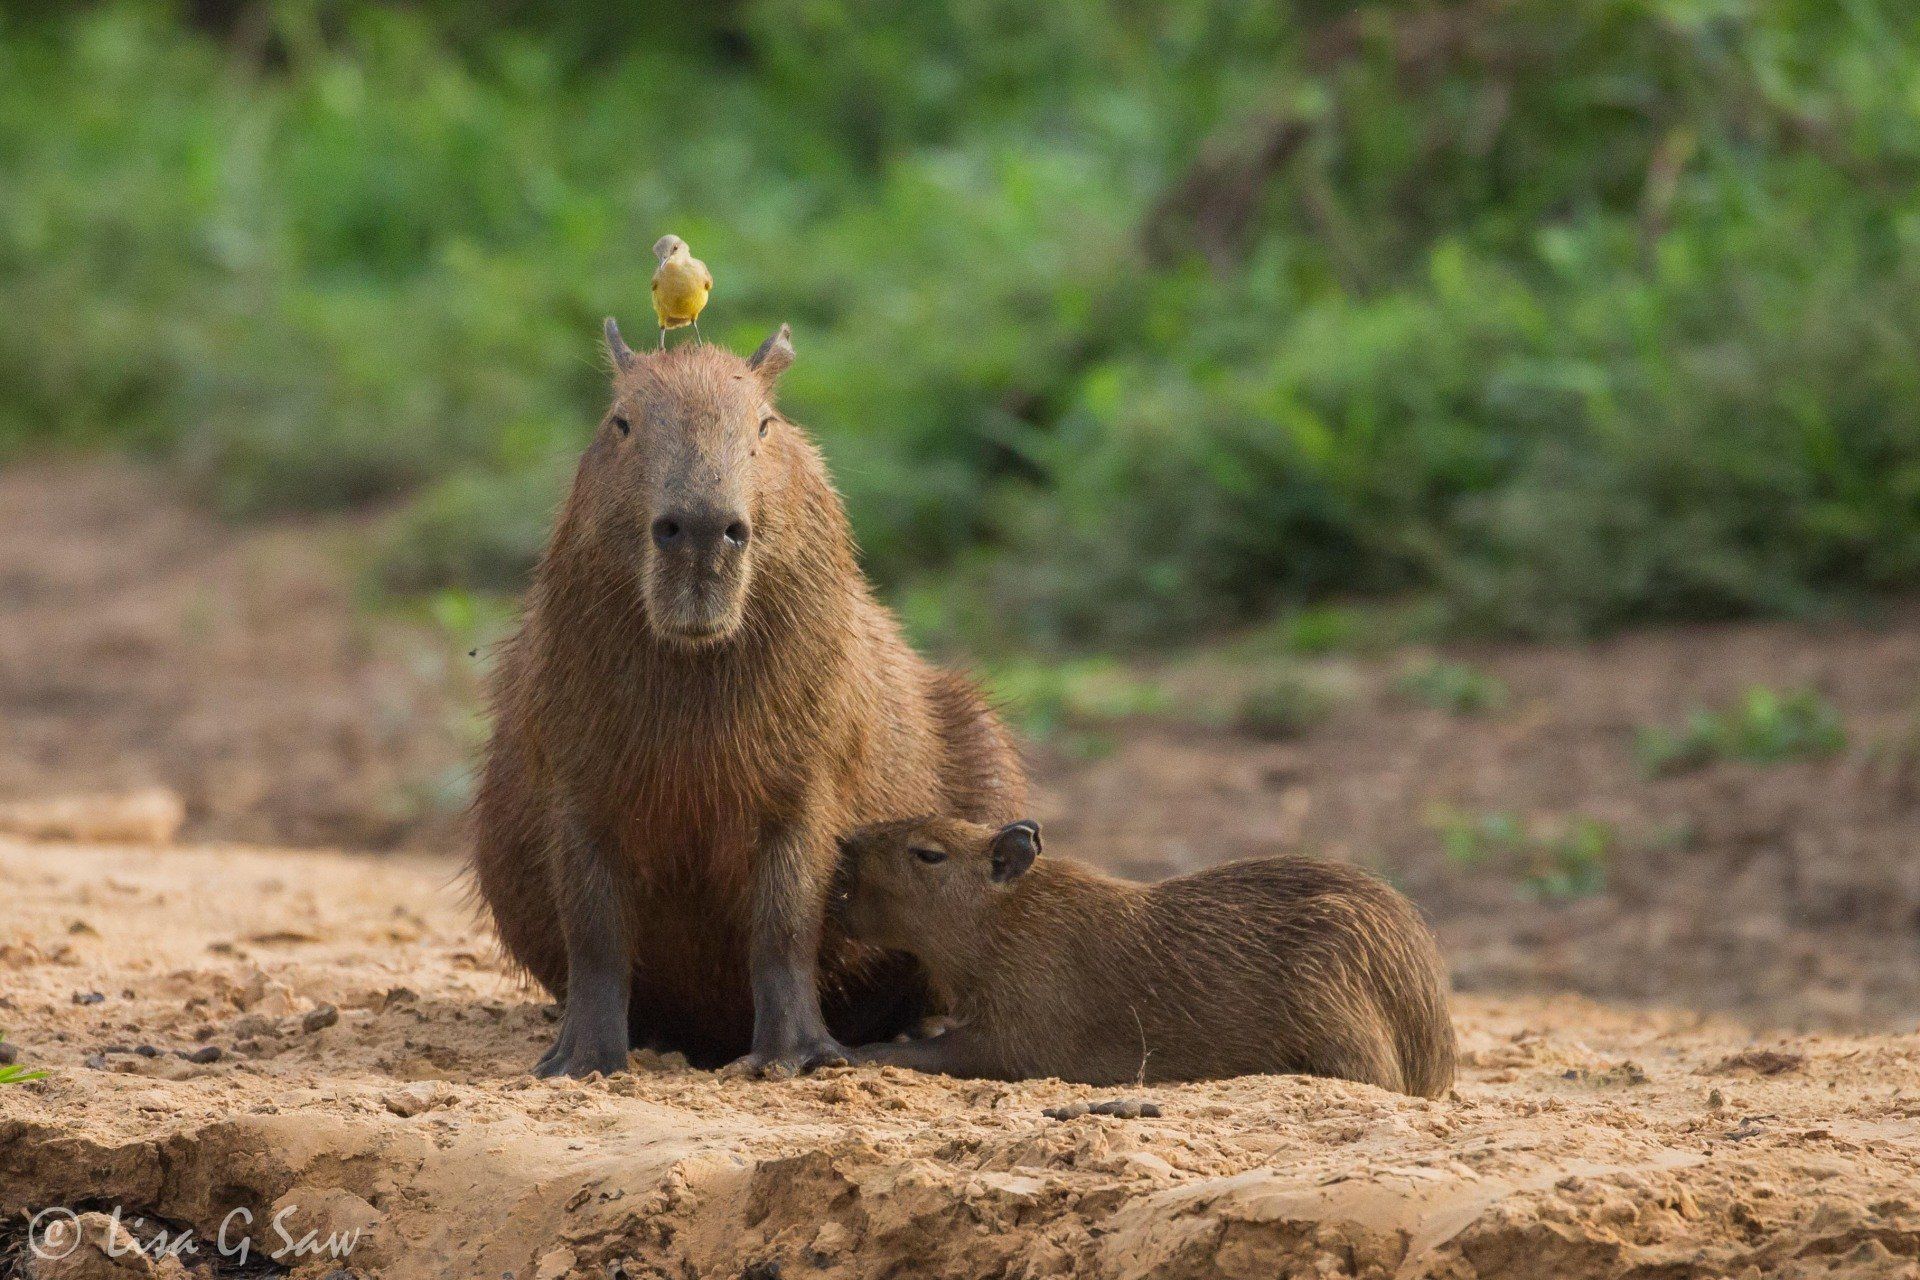 Capybara pup suckling from its mother, Brazil